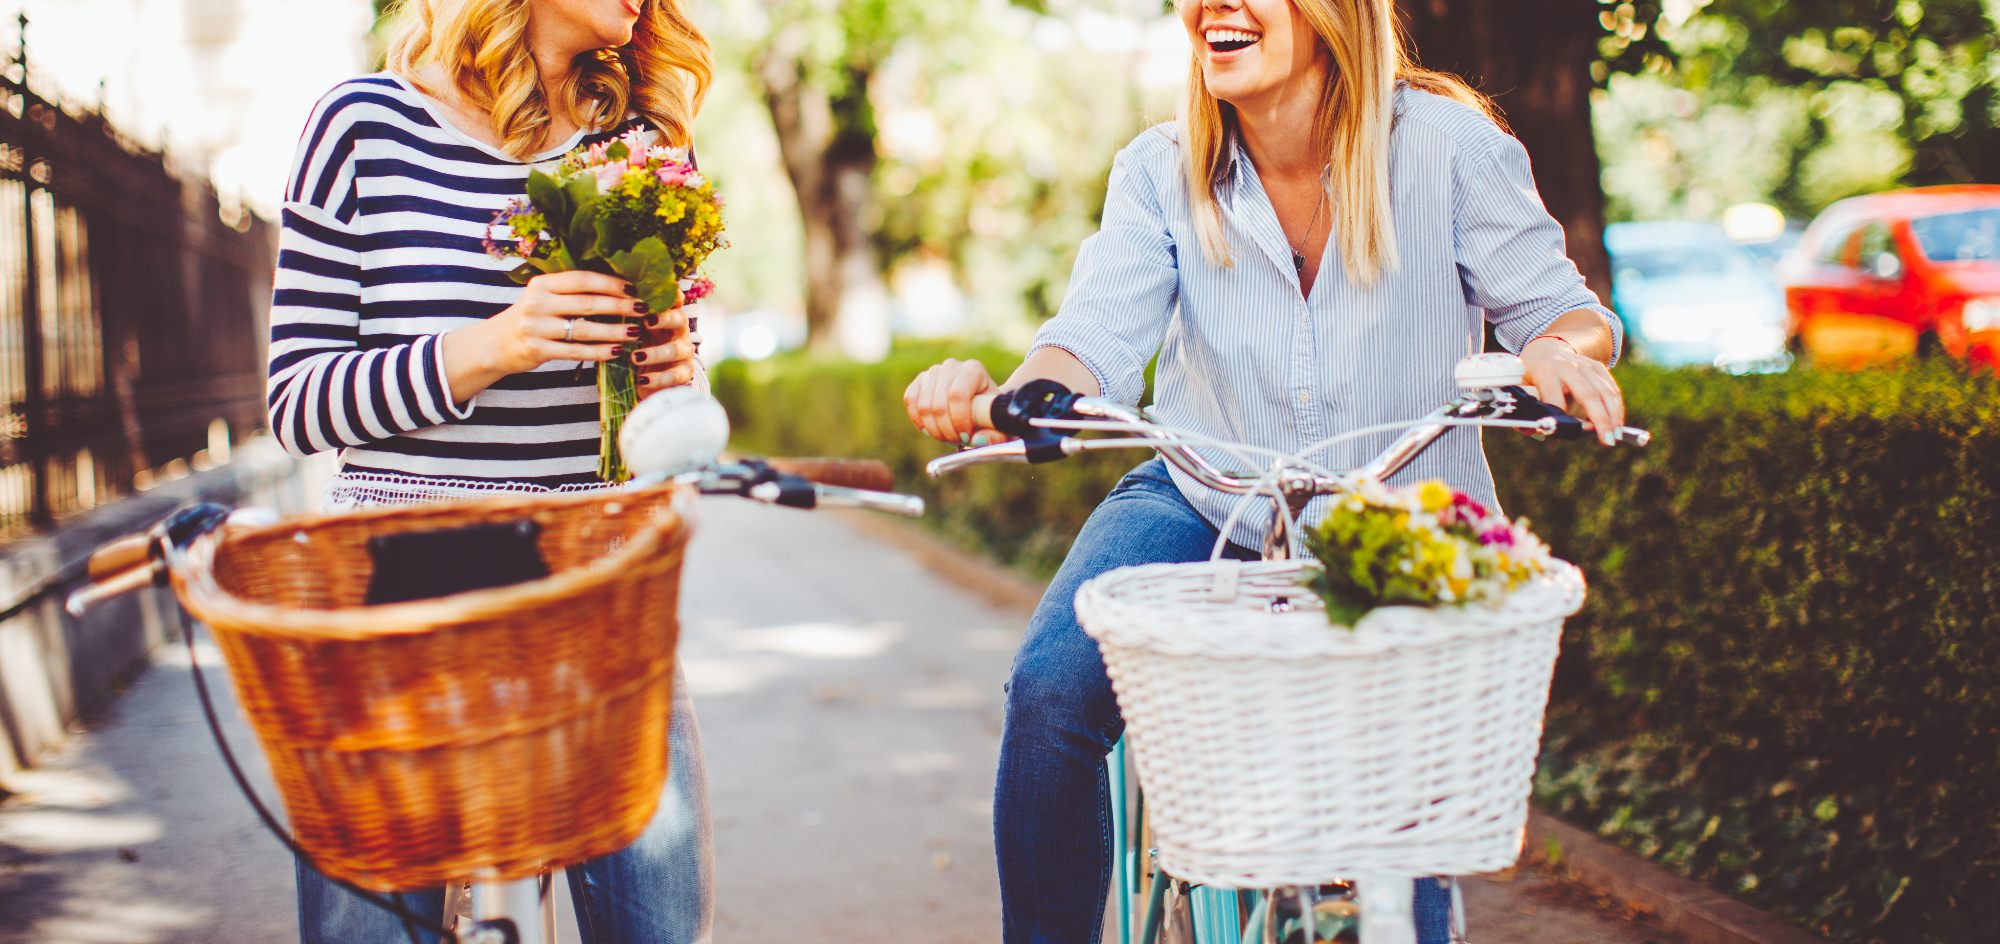 two friends on bikes smiling with flowers in their baskets